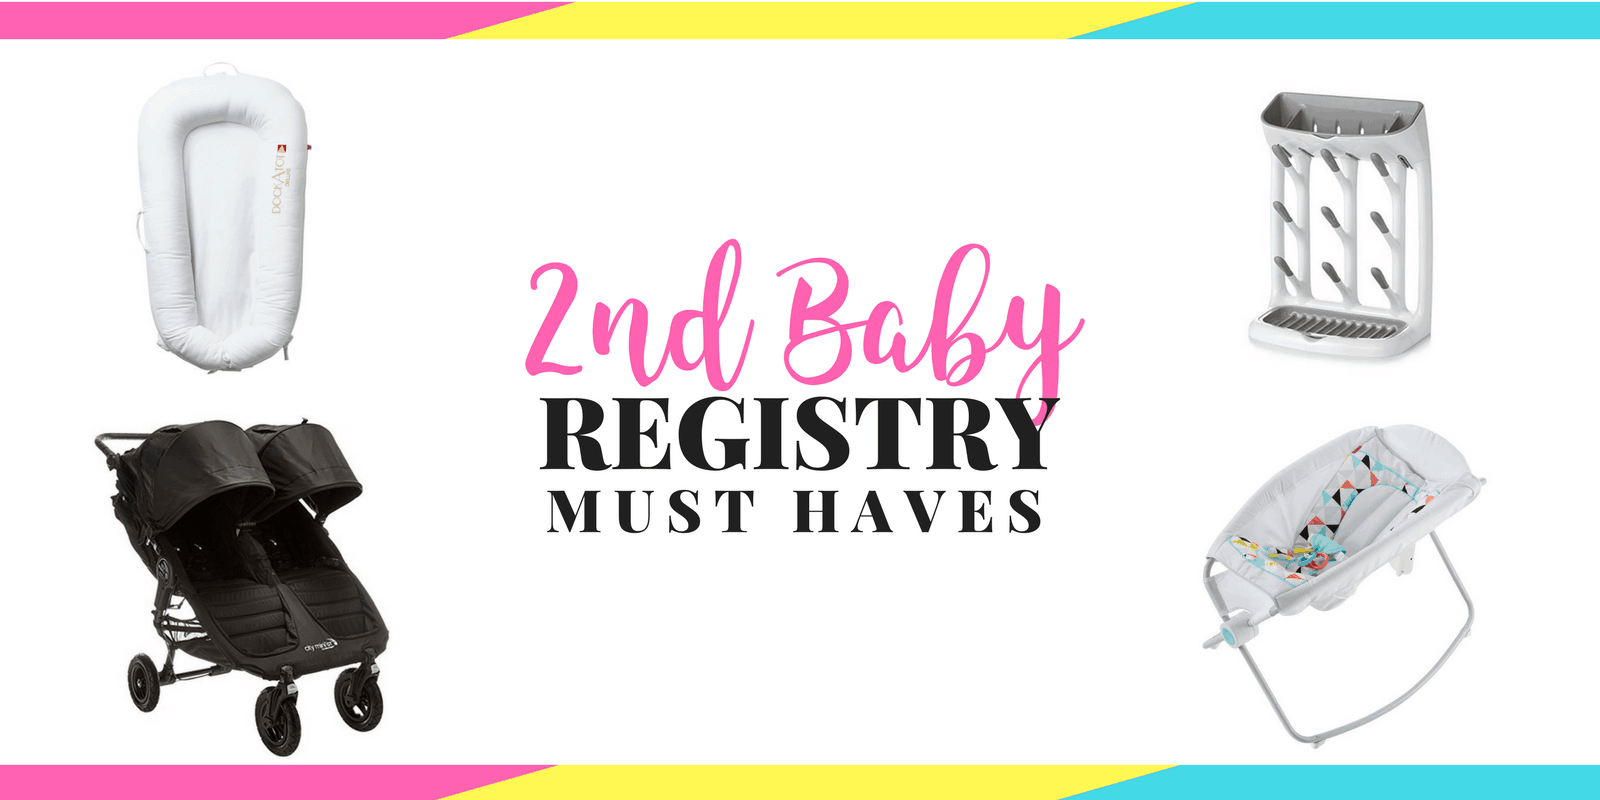 Image graphic with text for 2cd Baby Registry Must Haves.